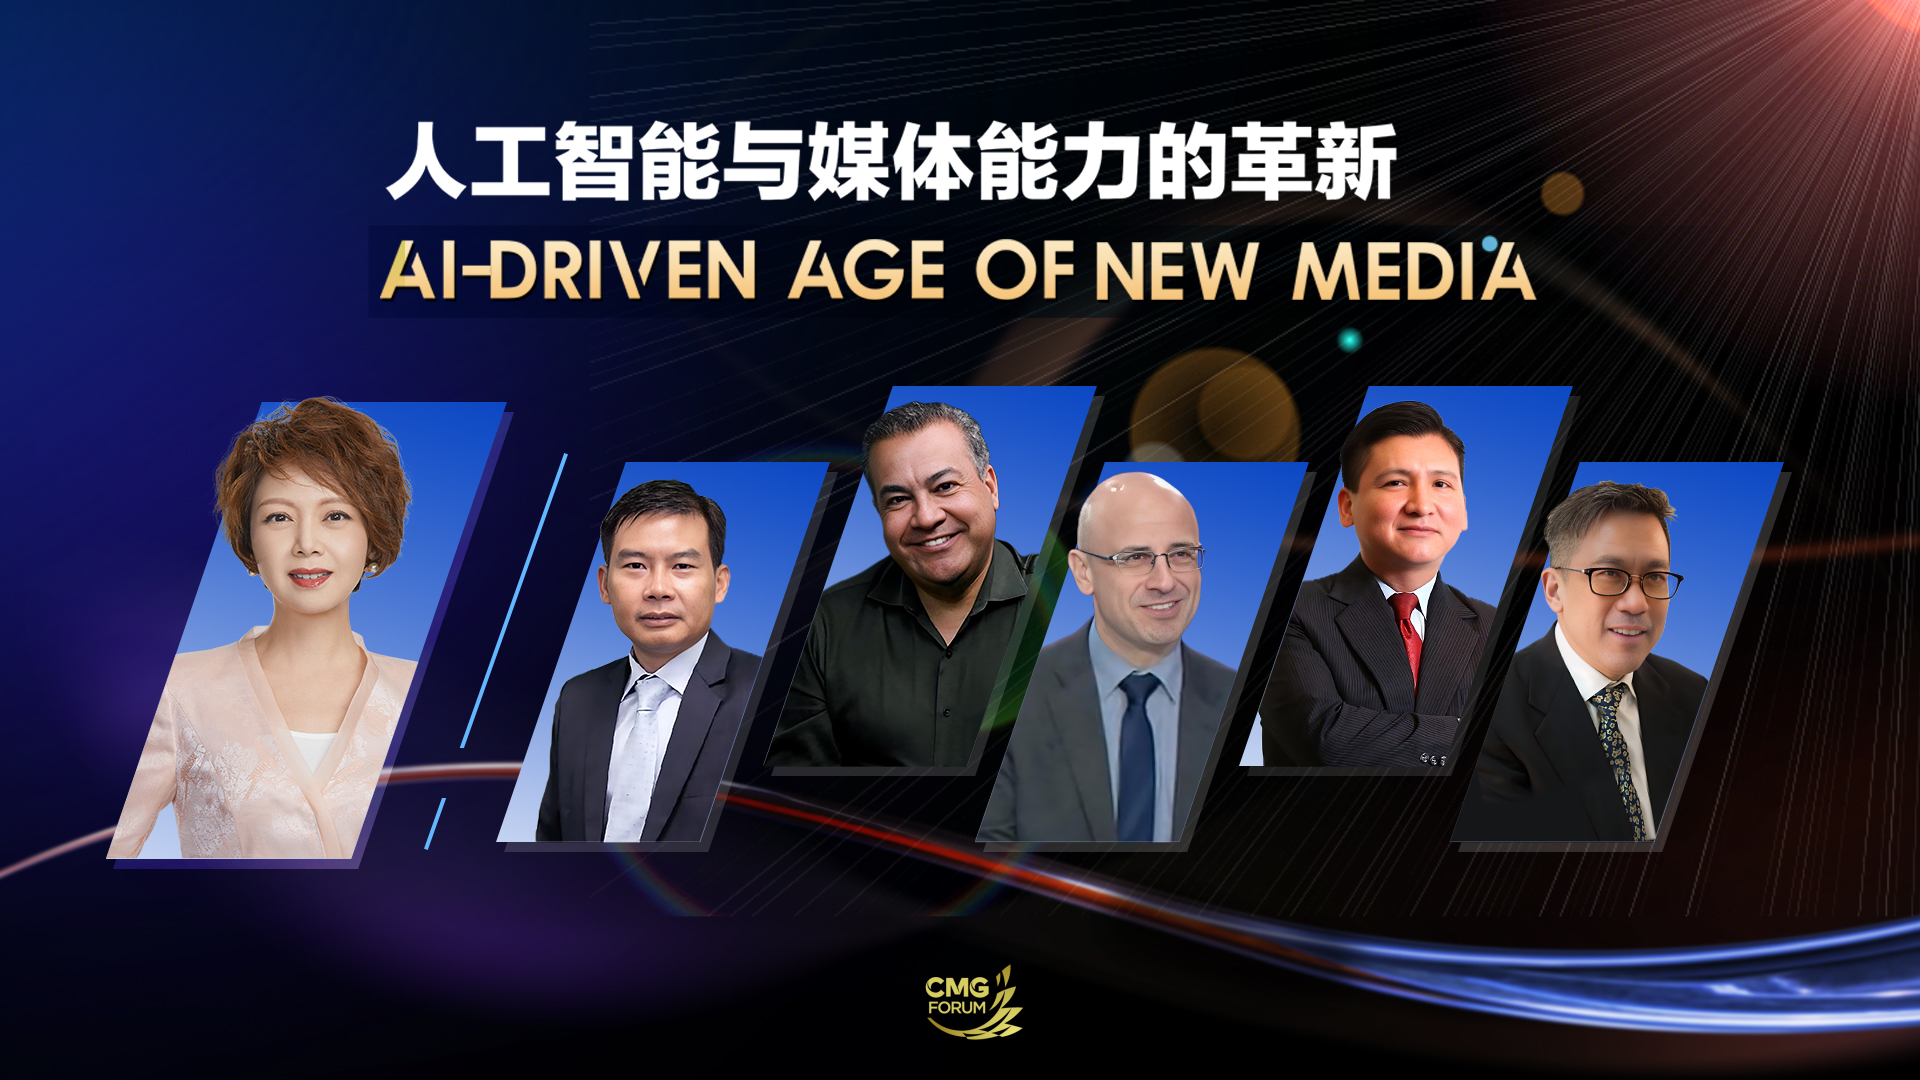 Watch: AI-Driven Age of New Media